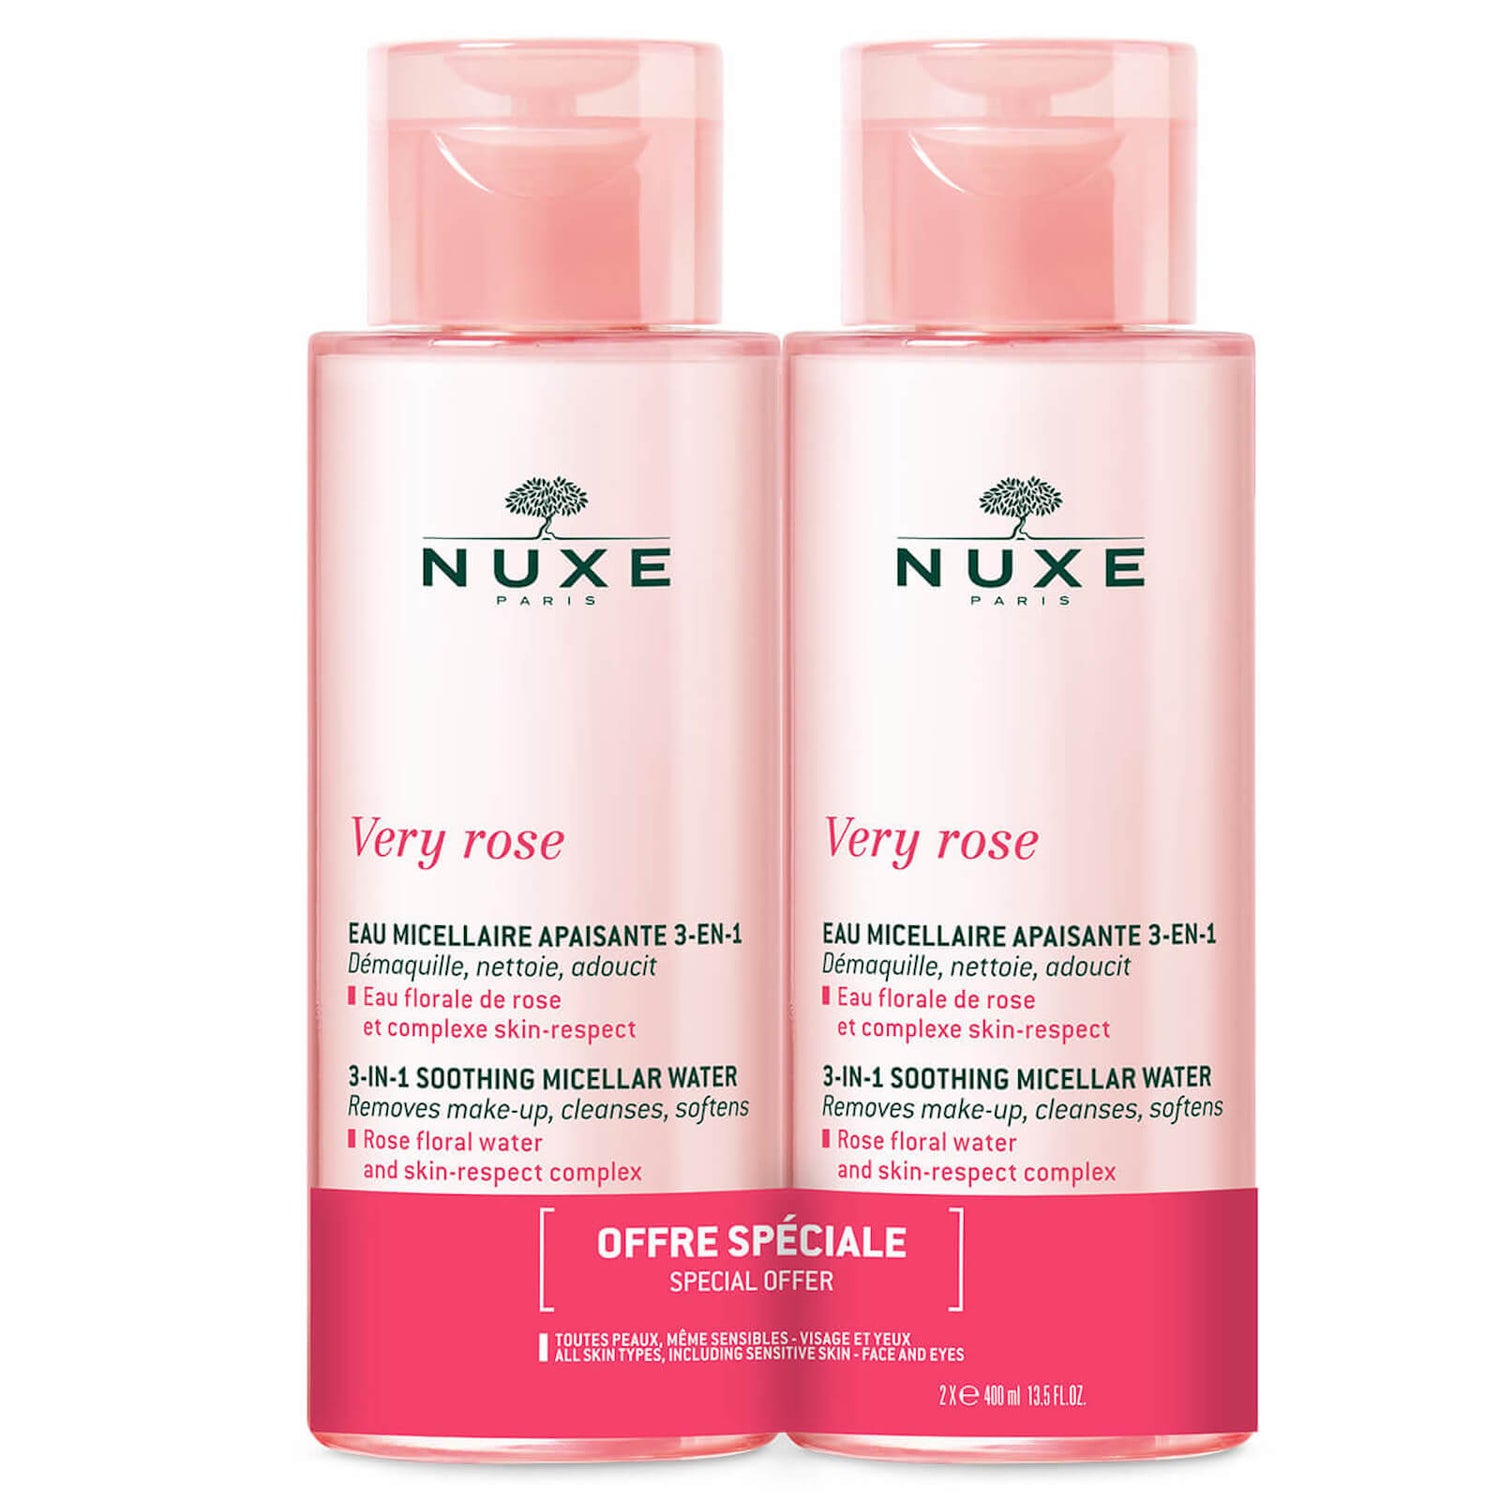 NUXE Very Rose 3-in-1 Soothing Micellar Water Duo 2 x 400ml NUXE Very Rose zklidňující micelární voda 3 v 1 Duo 2 x 400 ml